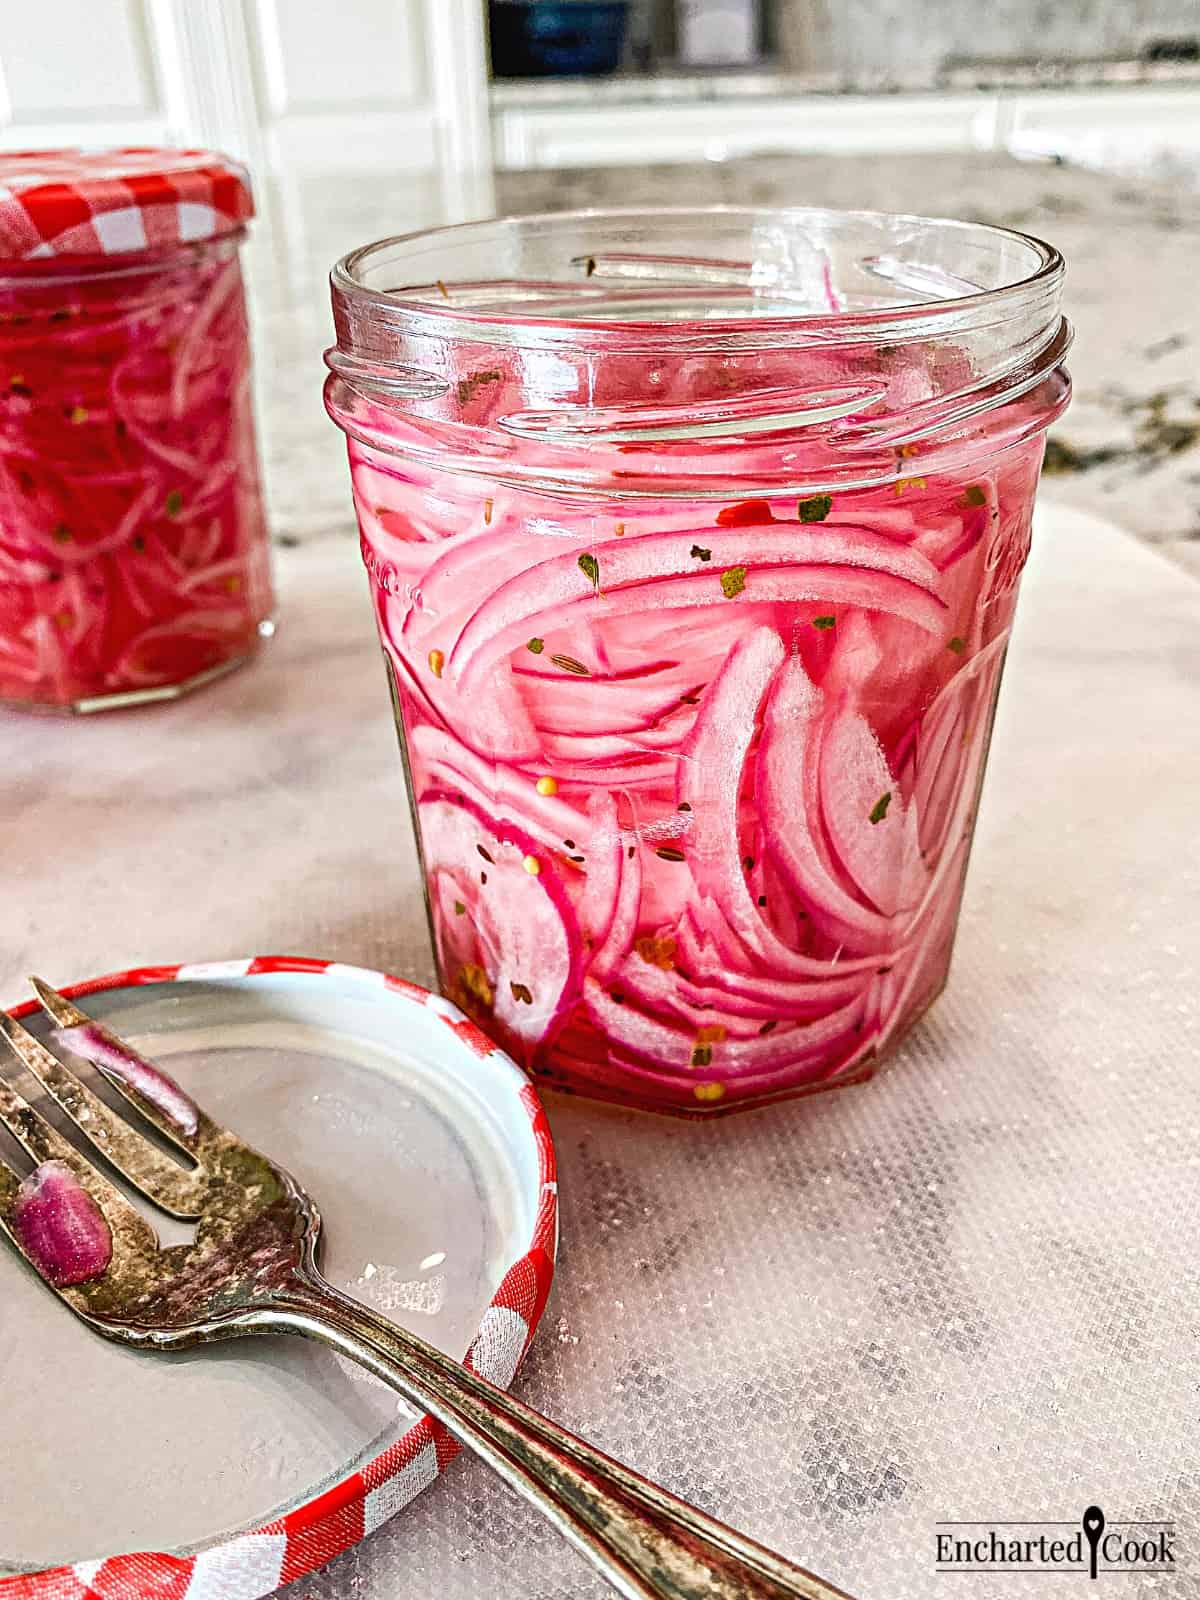 Slices of pink-colored pickled red onion in a jar with a jar lid and fork beside it.